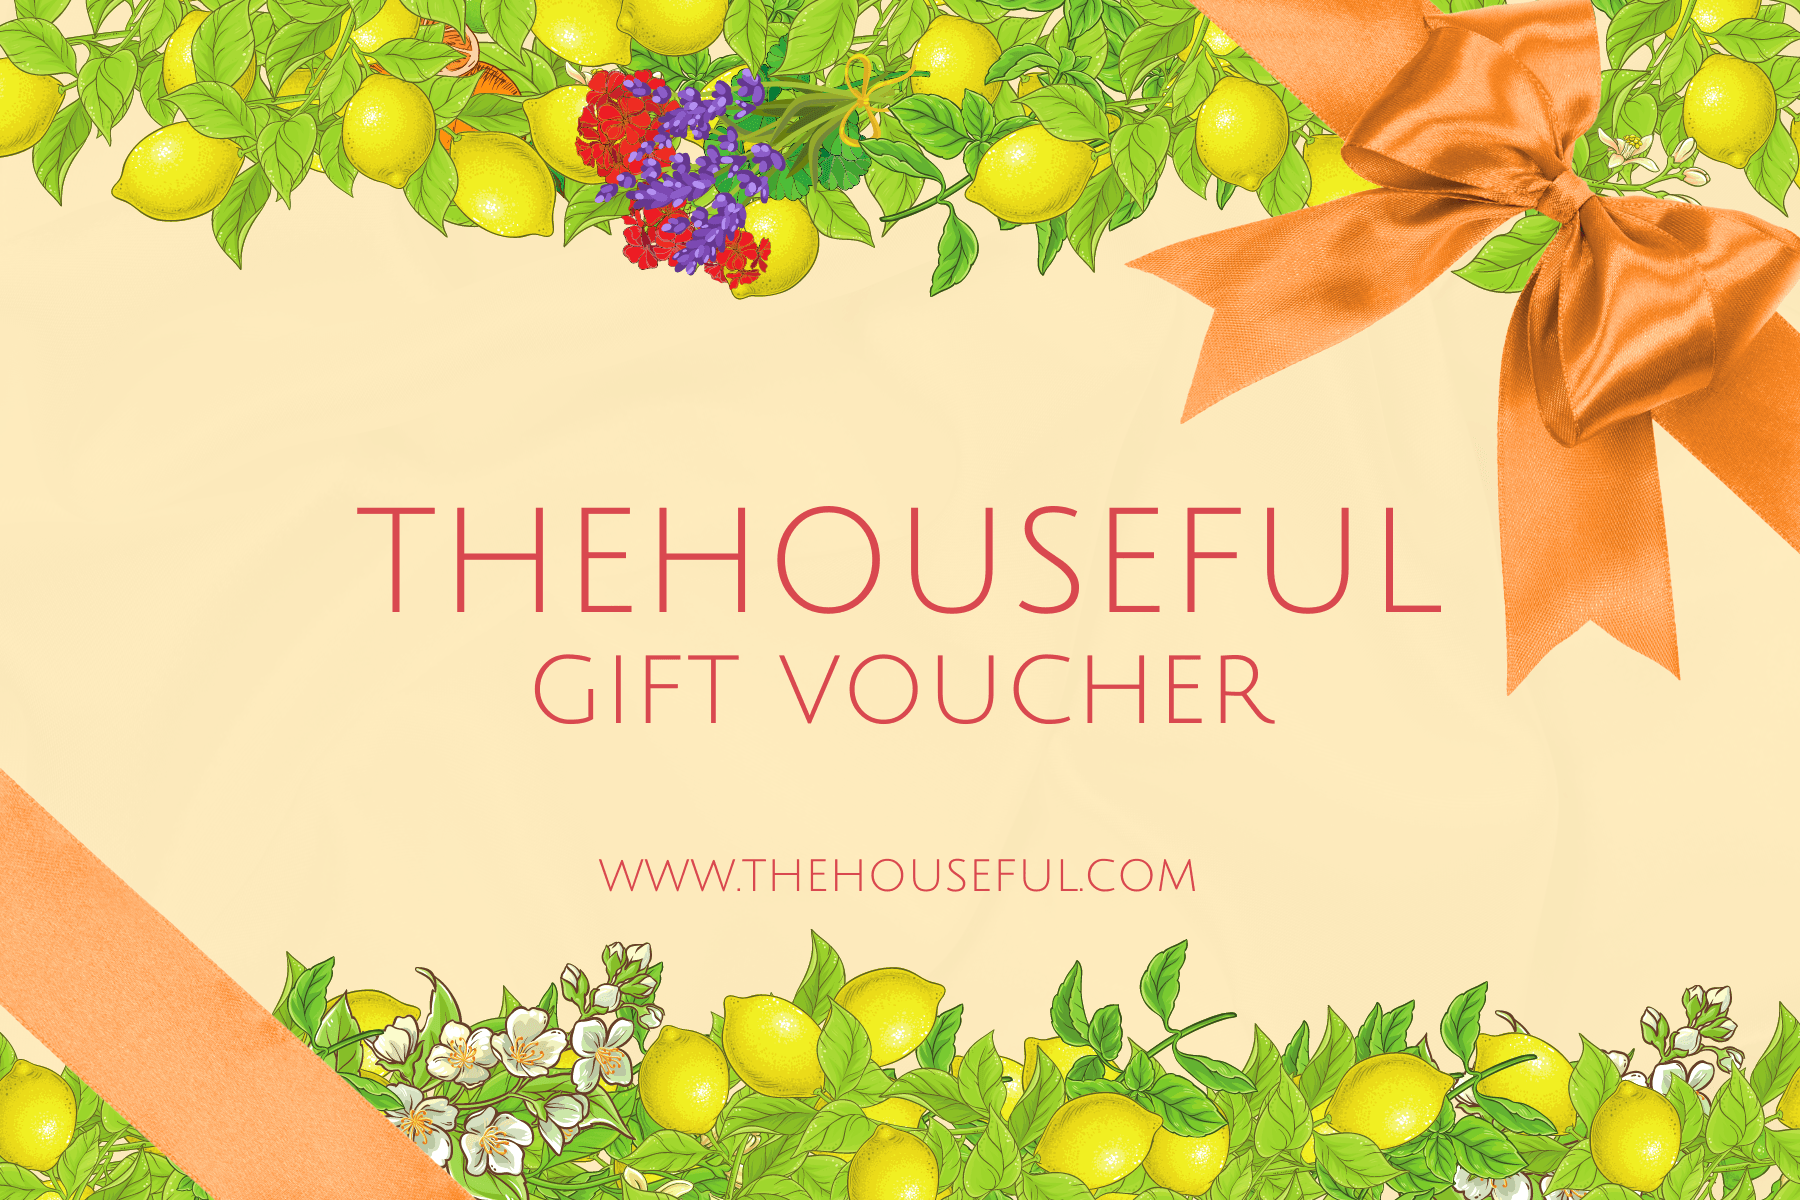 THEHOUSEFUL Gift Voucher - THEHOUSEFUL